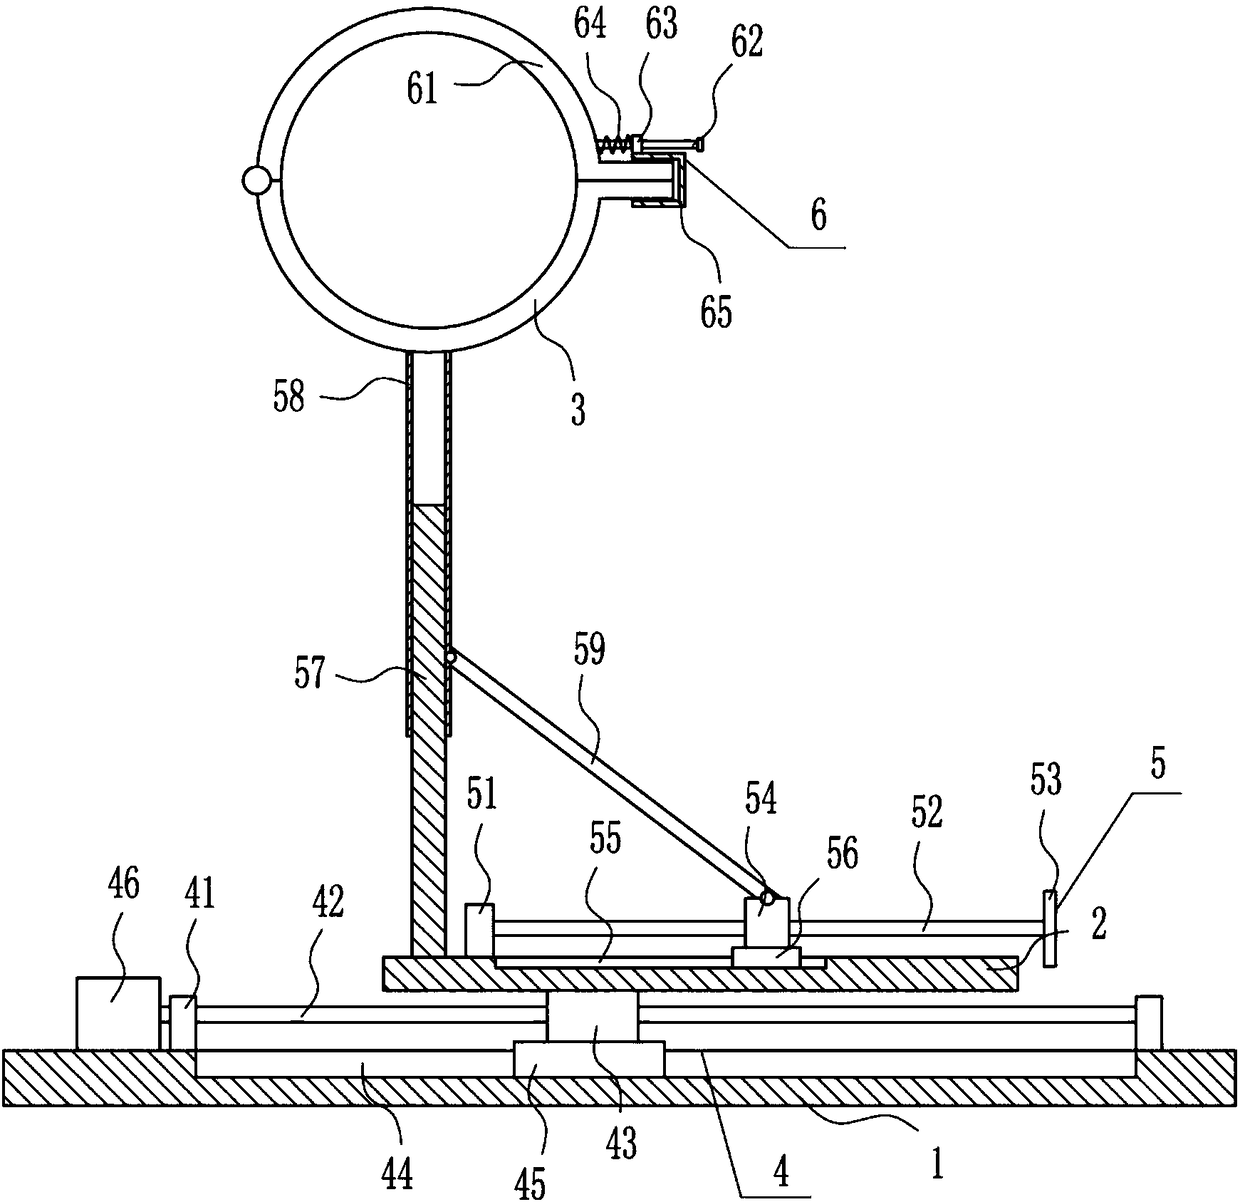 Supporting frame convenient to adjust and used for petroleum pipeline installation